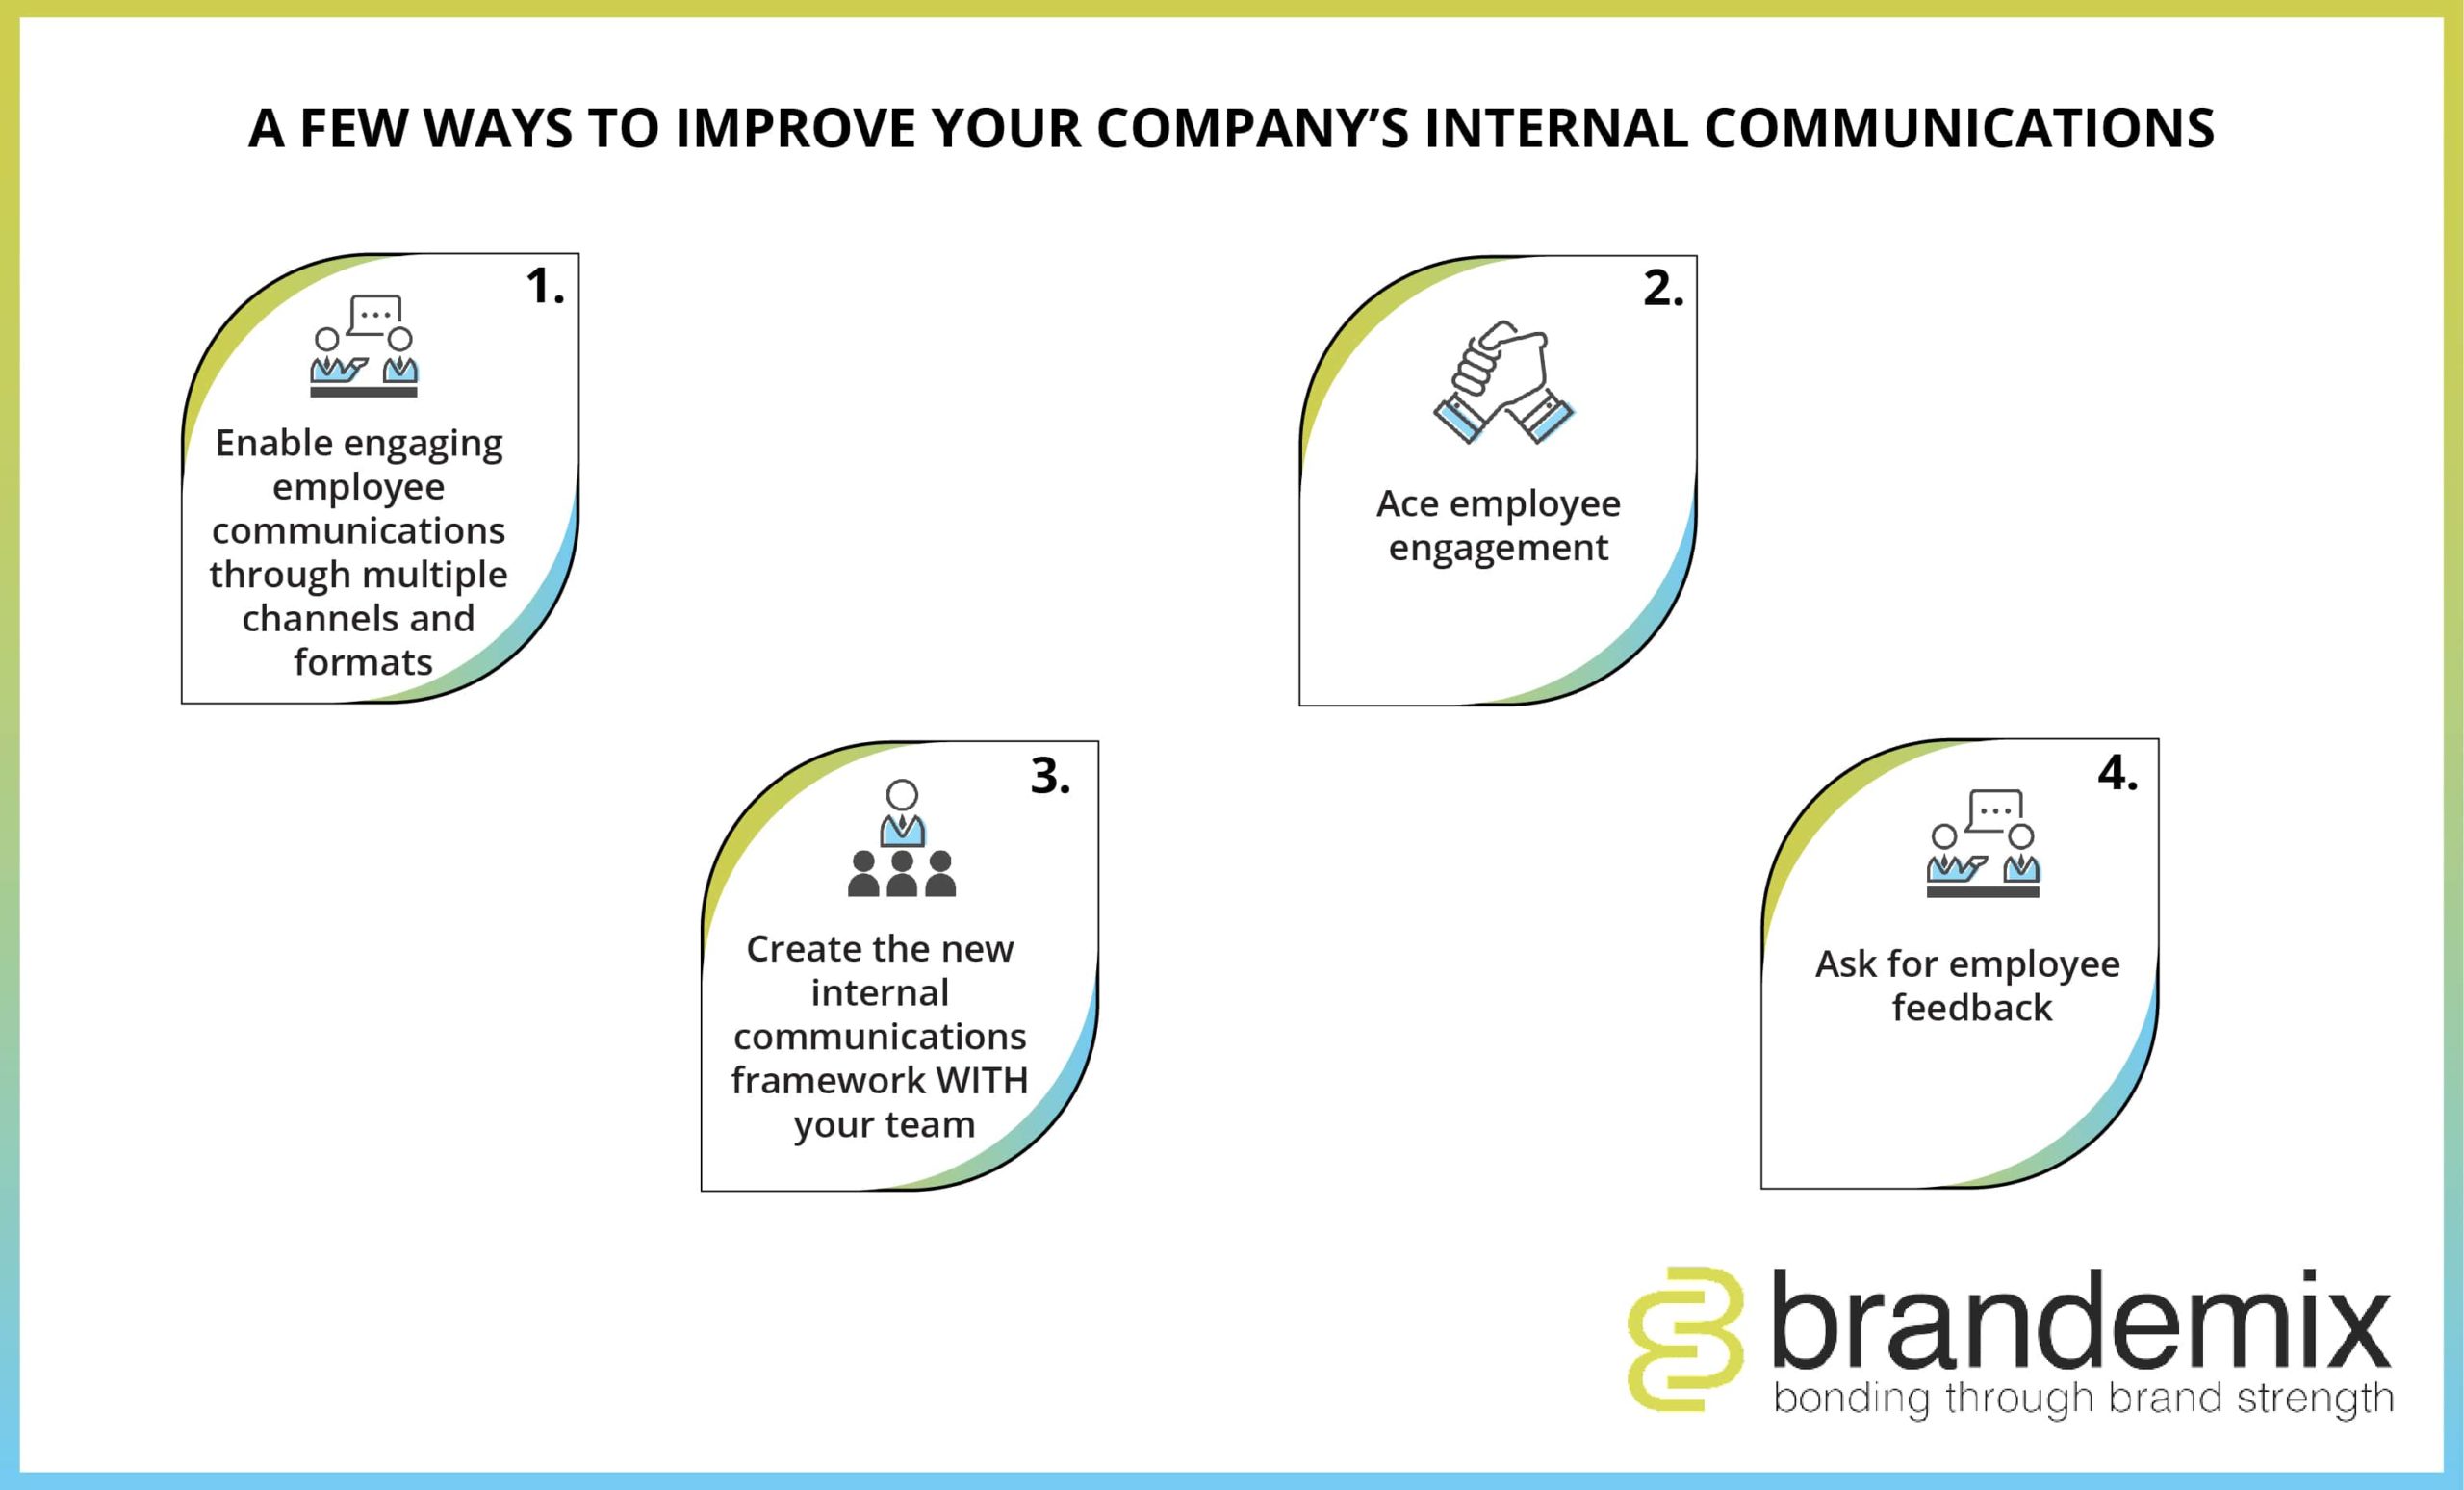 Here Are A Few Ways To Improve Your Company’s Internal Communications